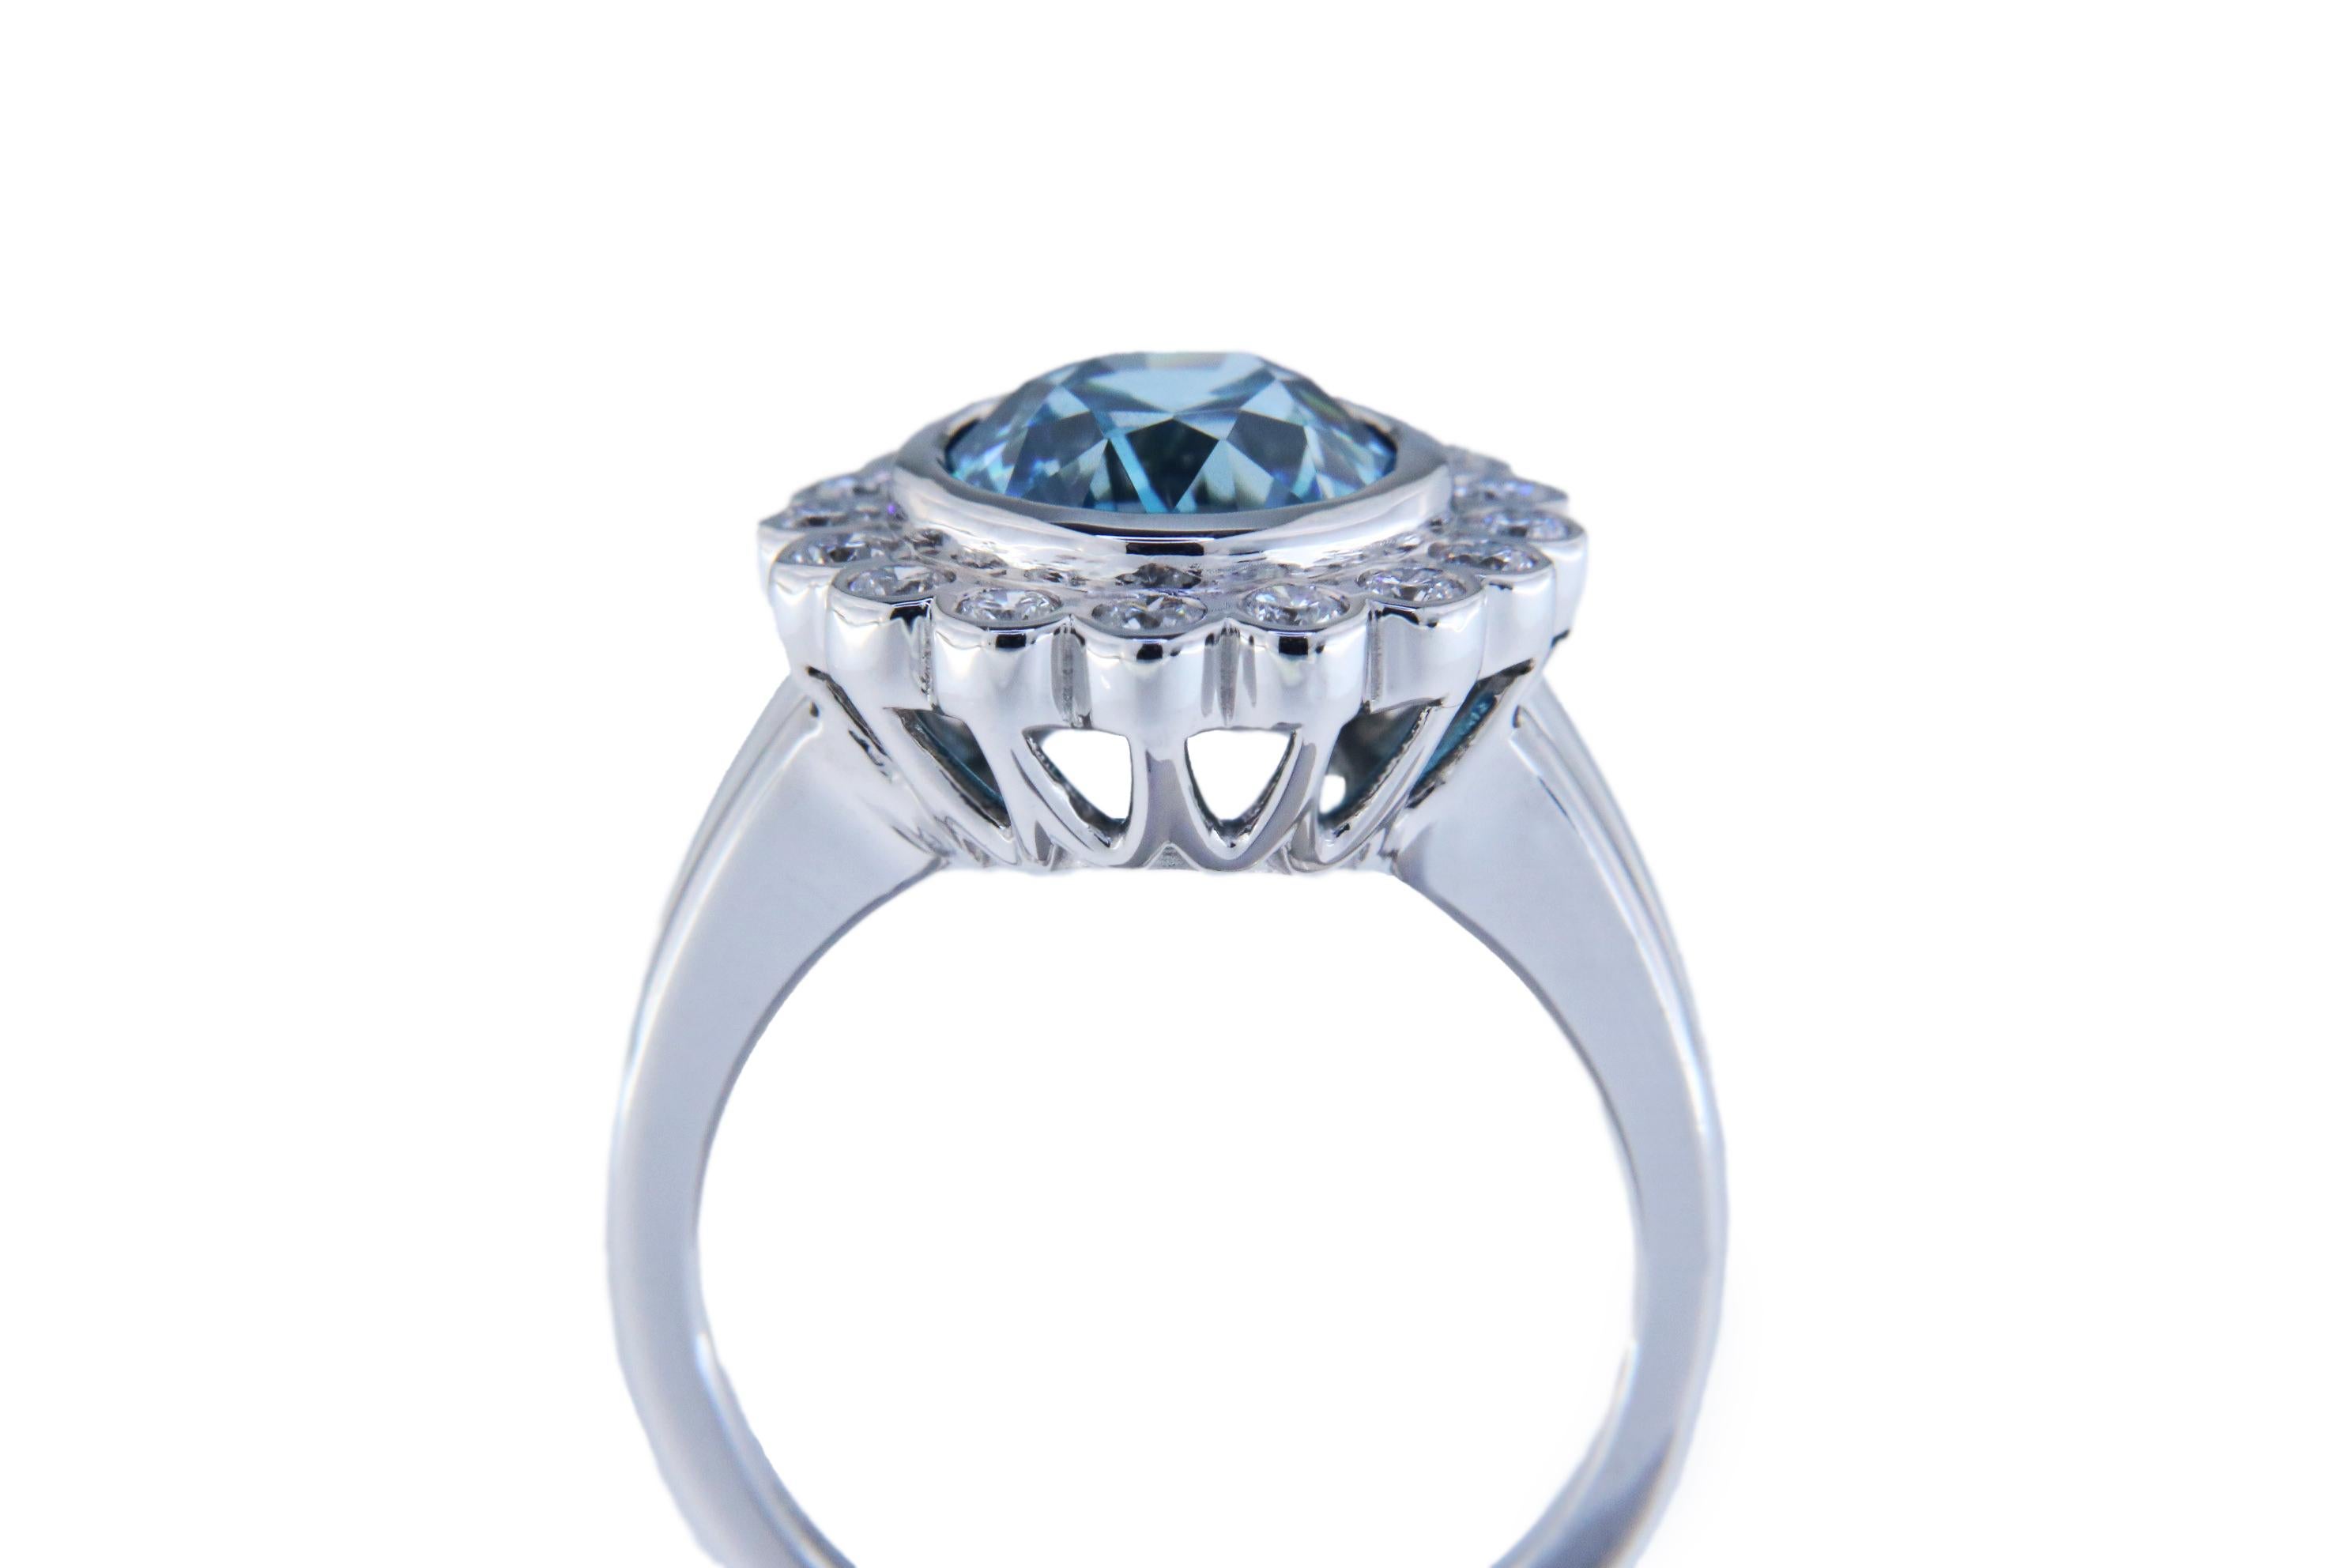 Orloff of Denmark, 6 ct Natural Blue Zircon Diamond Ring in 925 Sterling Silver In New Condition For Sale In Hua Hin, TH